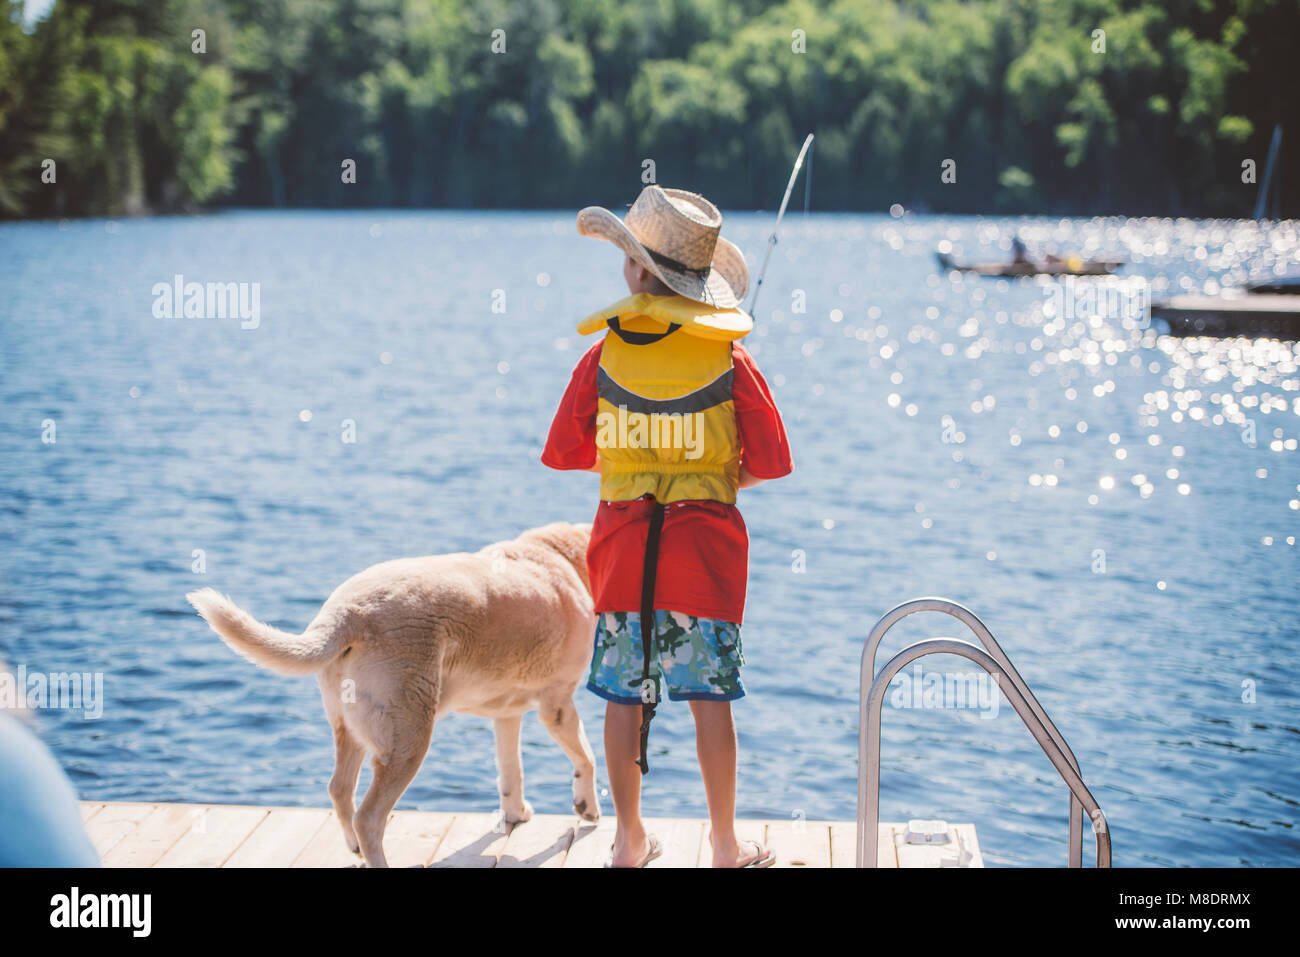 https://c8.alamy.com/comp/M8DRMX/rear-view-of-dog-and-boy-in-cowboy-hat-fishing-from-lake-pier-M8DRMX.jpg